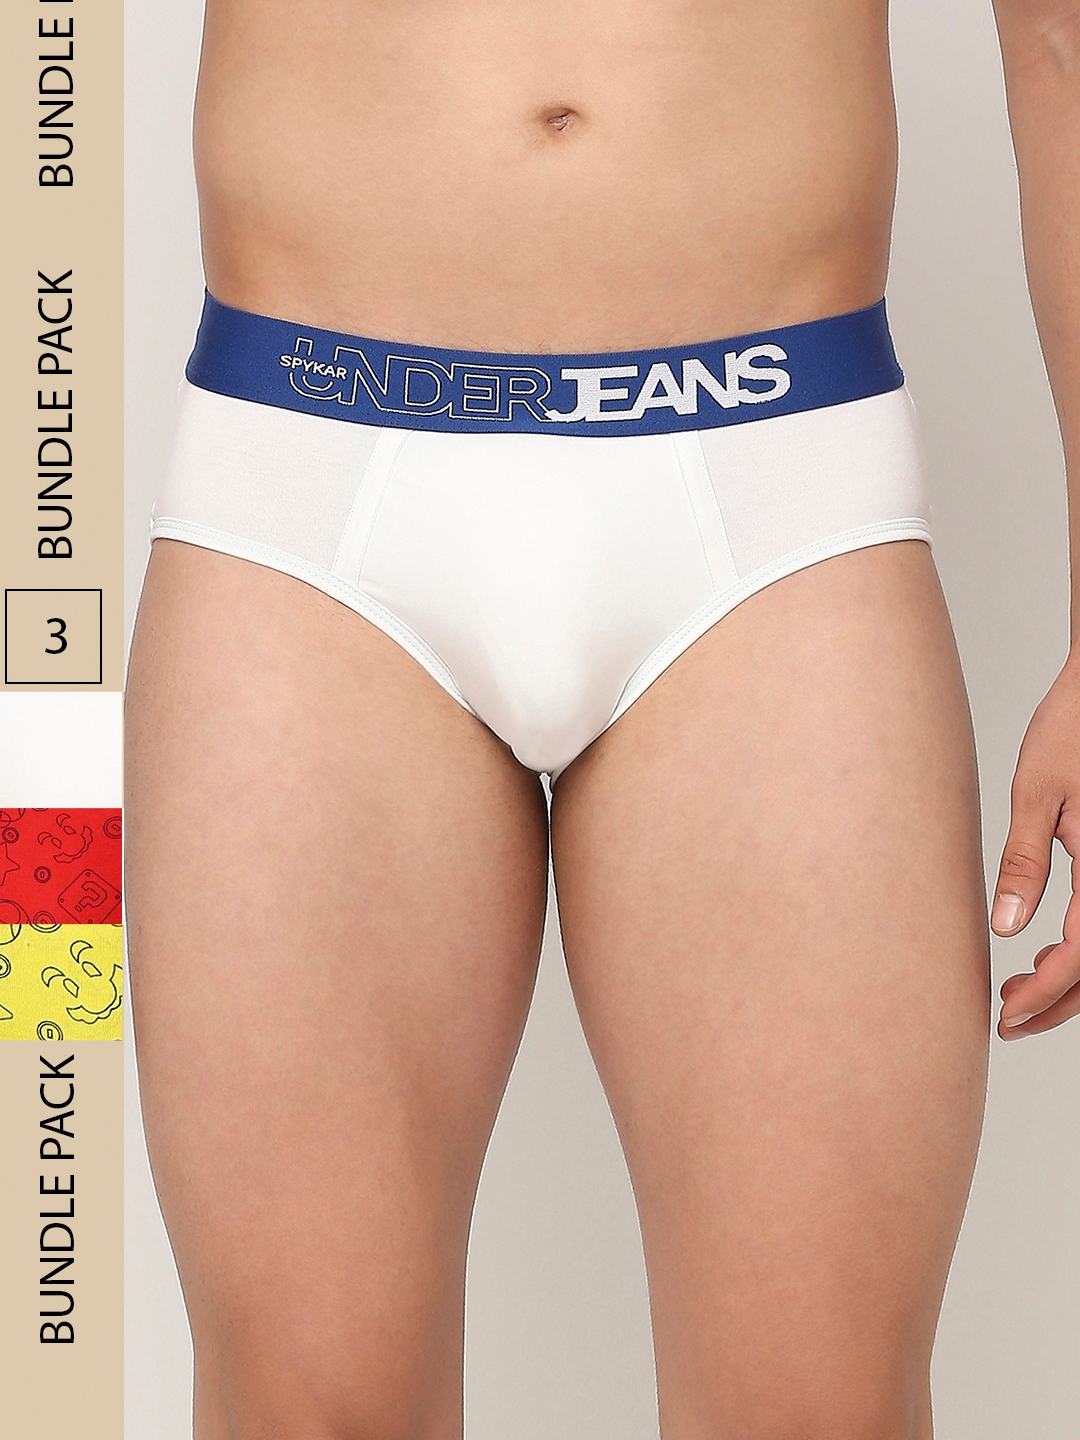 Underjeans by Spykar Premium Red Yellow & White Cotton Blend Printed Brief - Pack Of 3